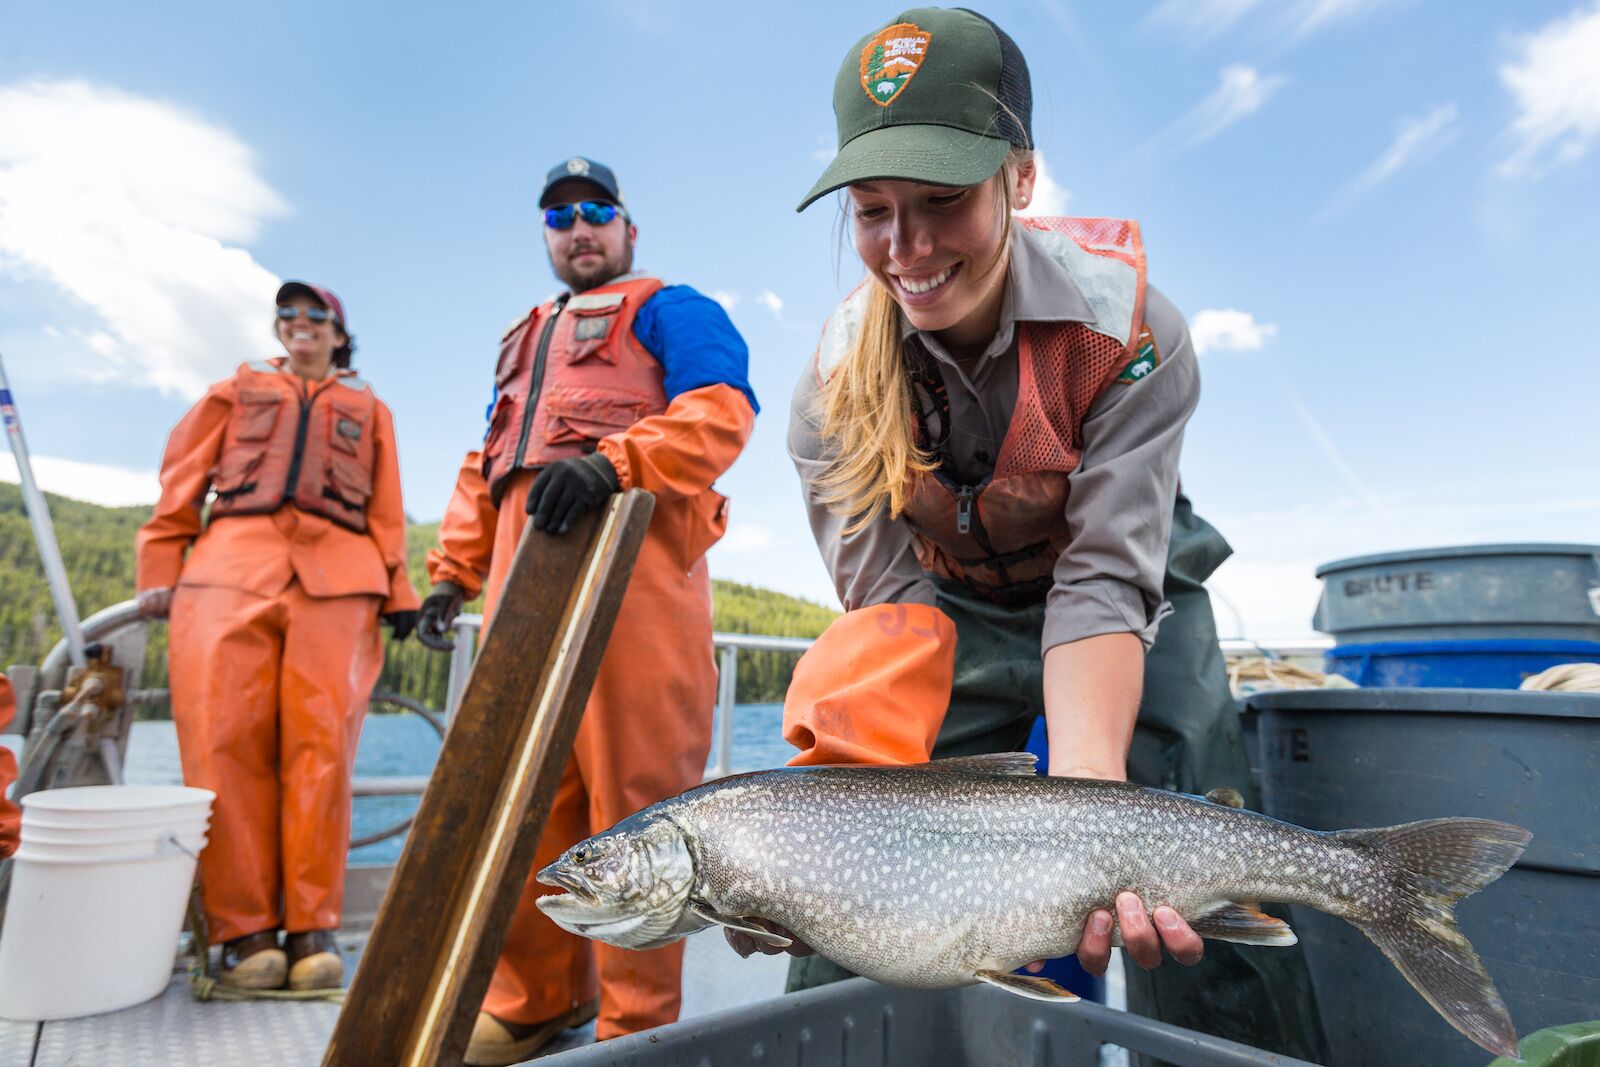 NPS staff fishing during teh summer in yellowstone